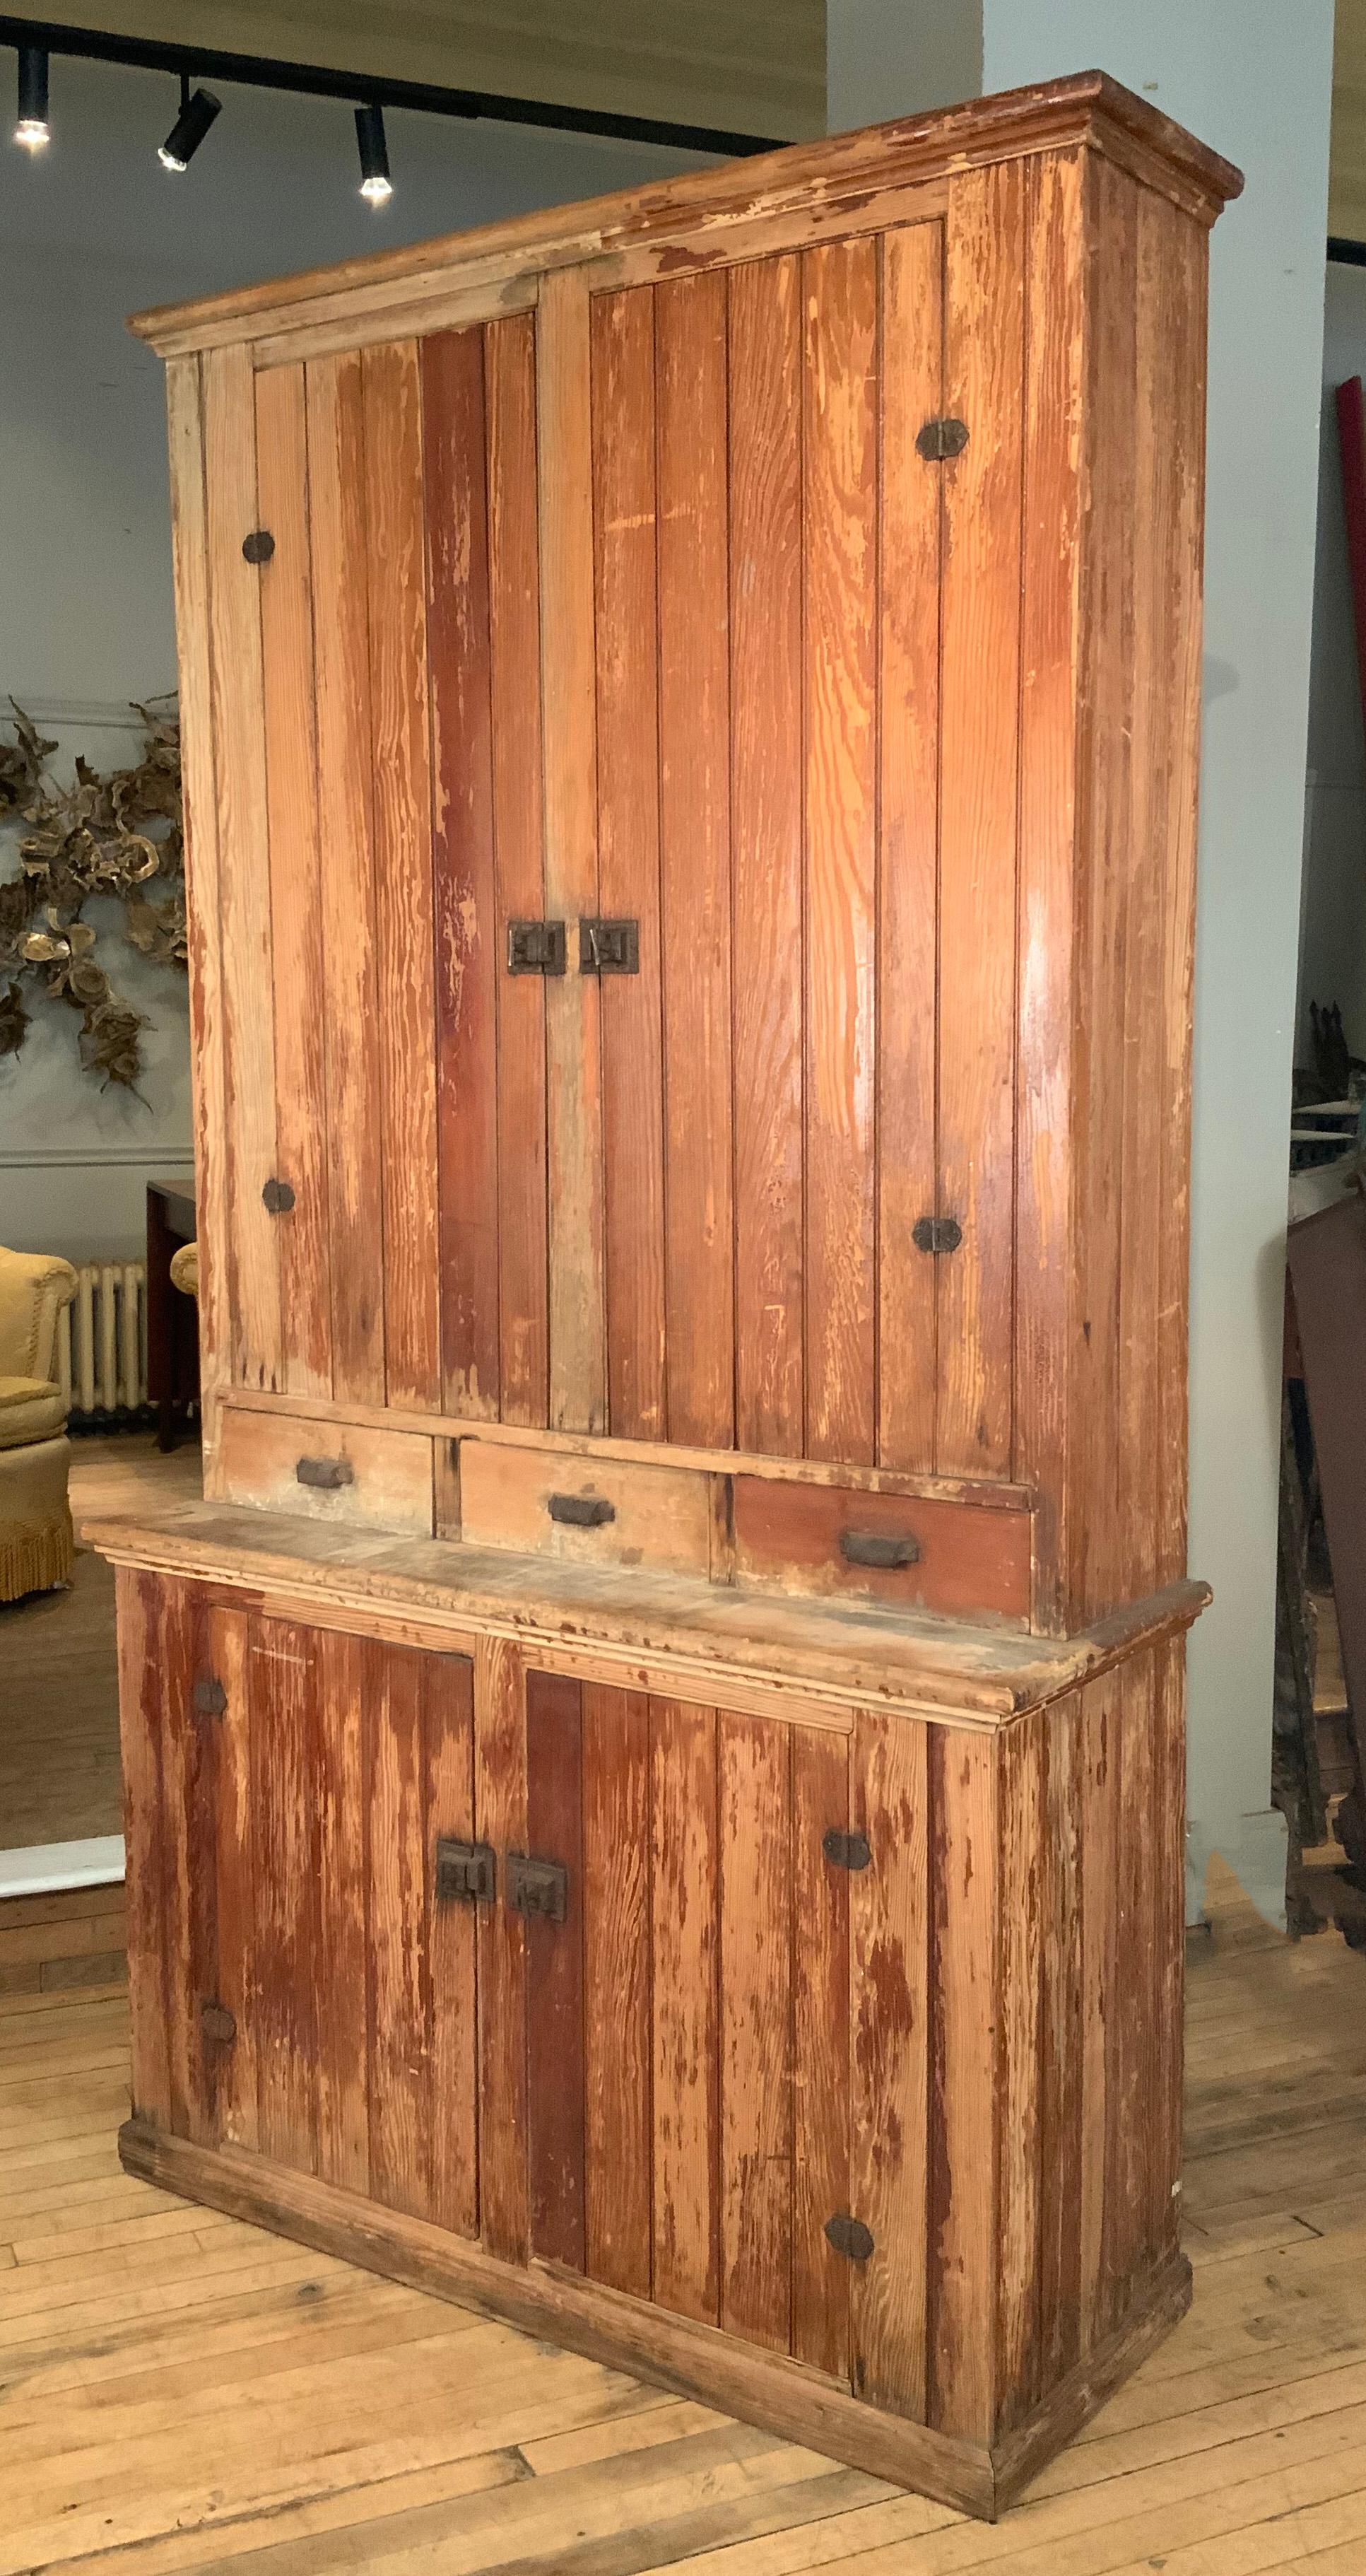 A very nice antique 19th century beadboard country cupboard, perfect for kitchen or pantry. made from beadboard, the upper cabinet has a pair of hinged doors, and three drawers. the lower portion is deeper and also has a pair of hinged door and